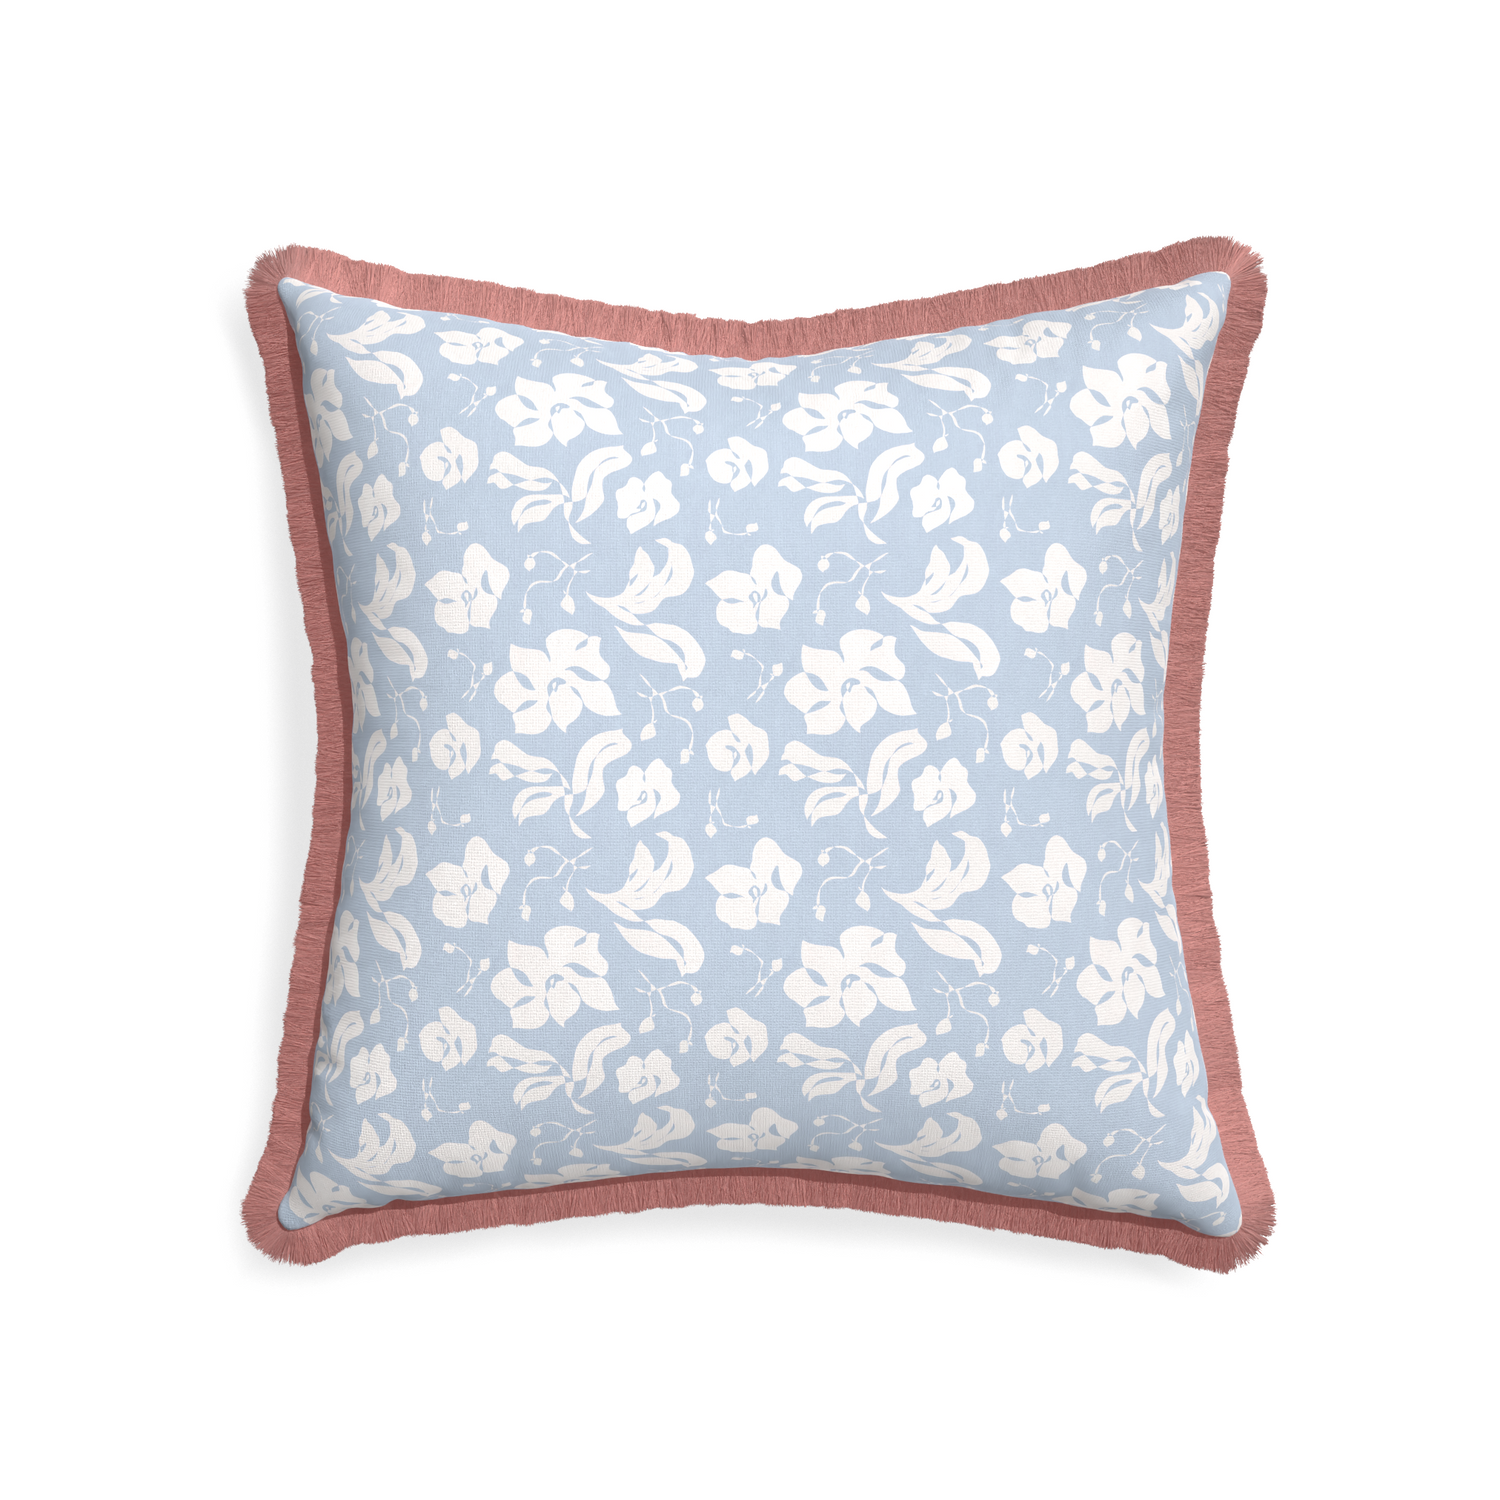 22-square georgia custom pillow with d fringe on white background